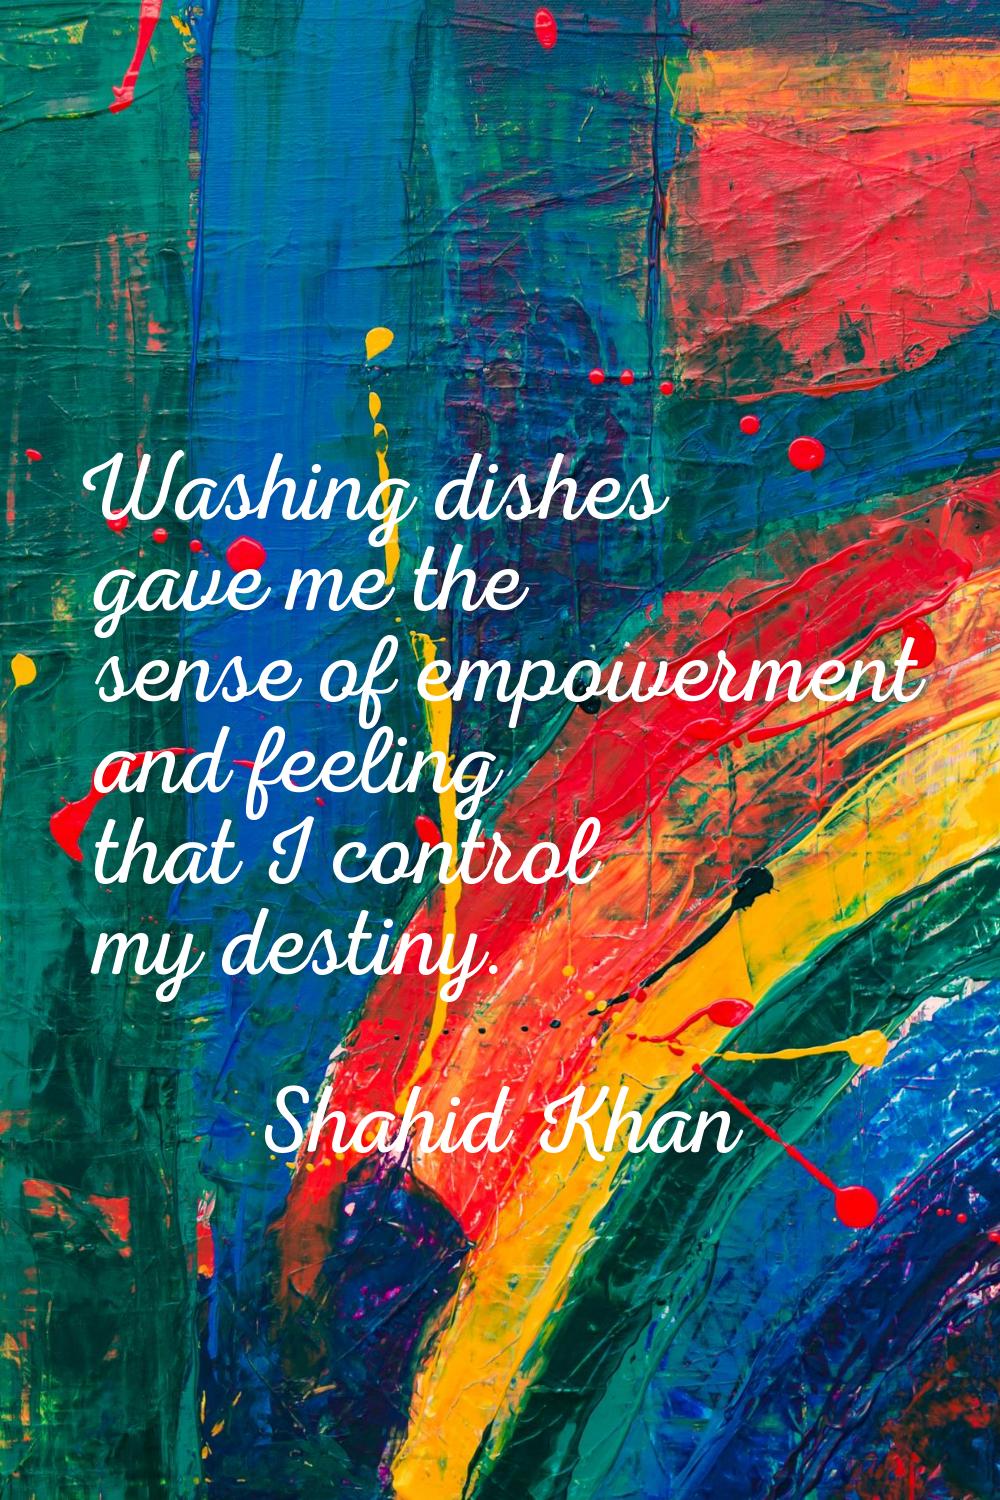 Washing dishes gave me the sense of empowerment and feeling that I control my destiny.